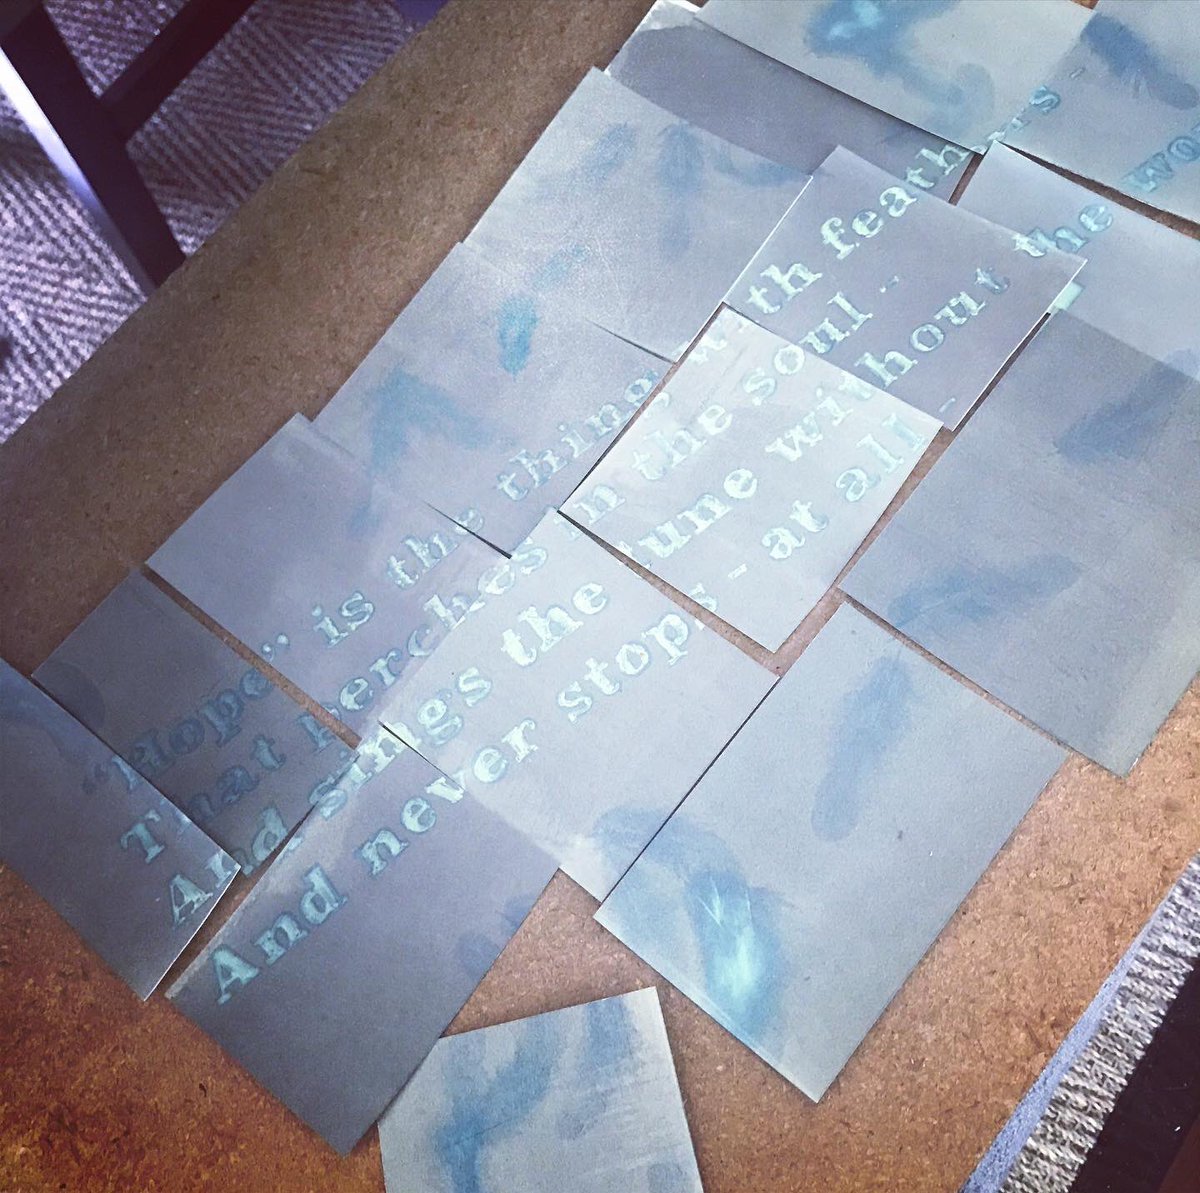 Also testing some hand draw text for a Cyanotype mural using Emily Dickinson’s ‘hope is the thing’ printed on vintage pillow cases hand embellished by a friends grandmother.  #cyanotype  #poetry  #mural